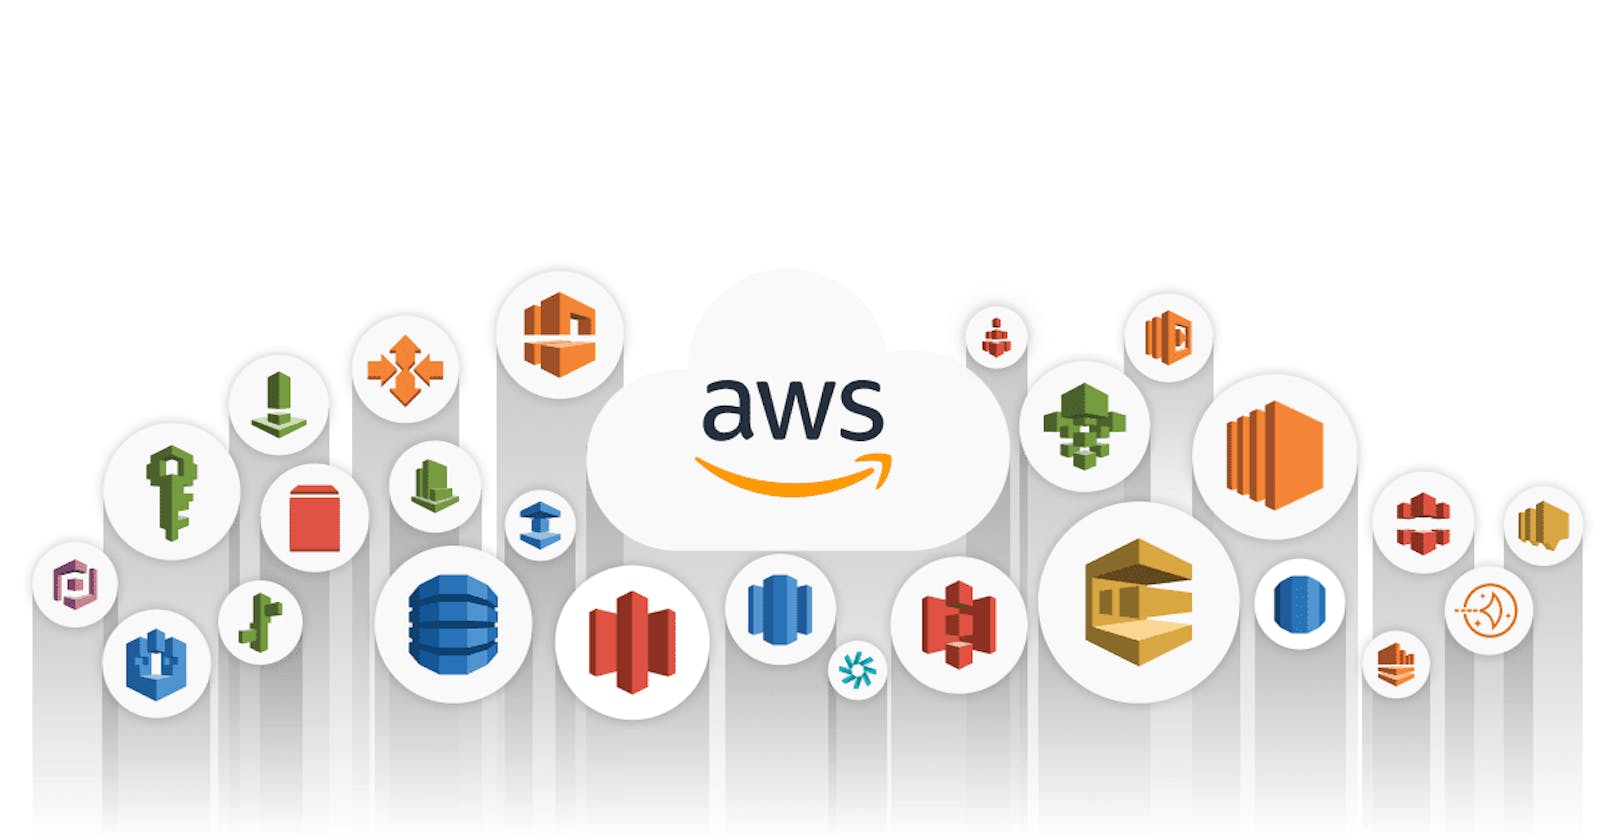 What are different Amazon Web Services and their uses